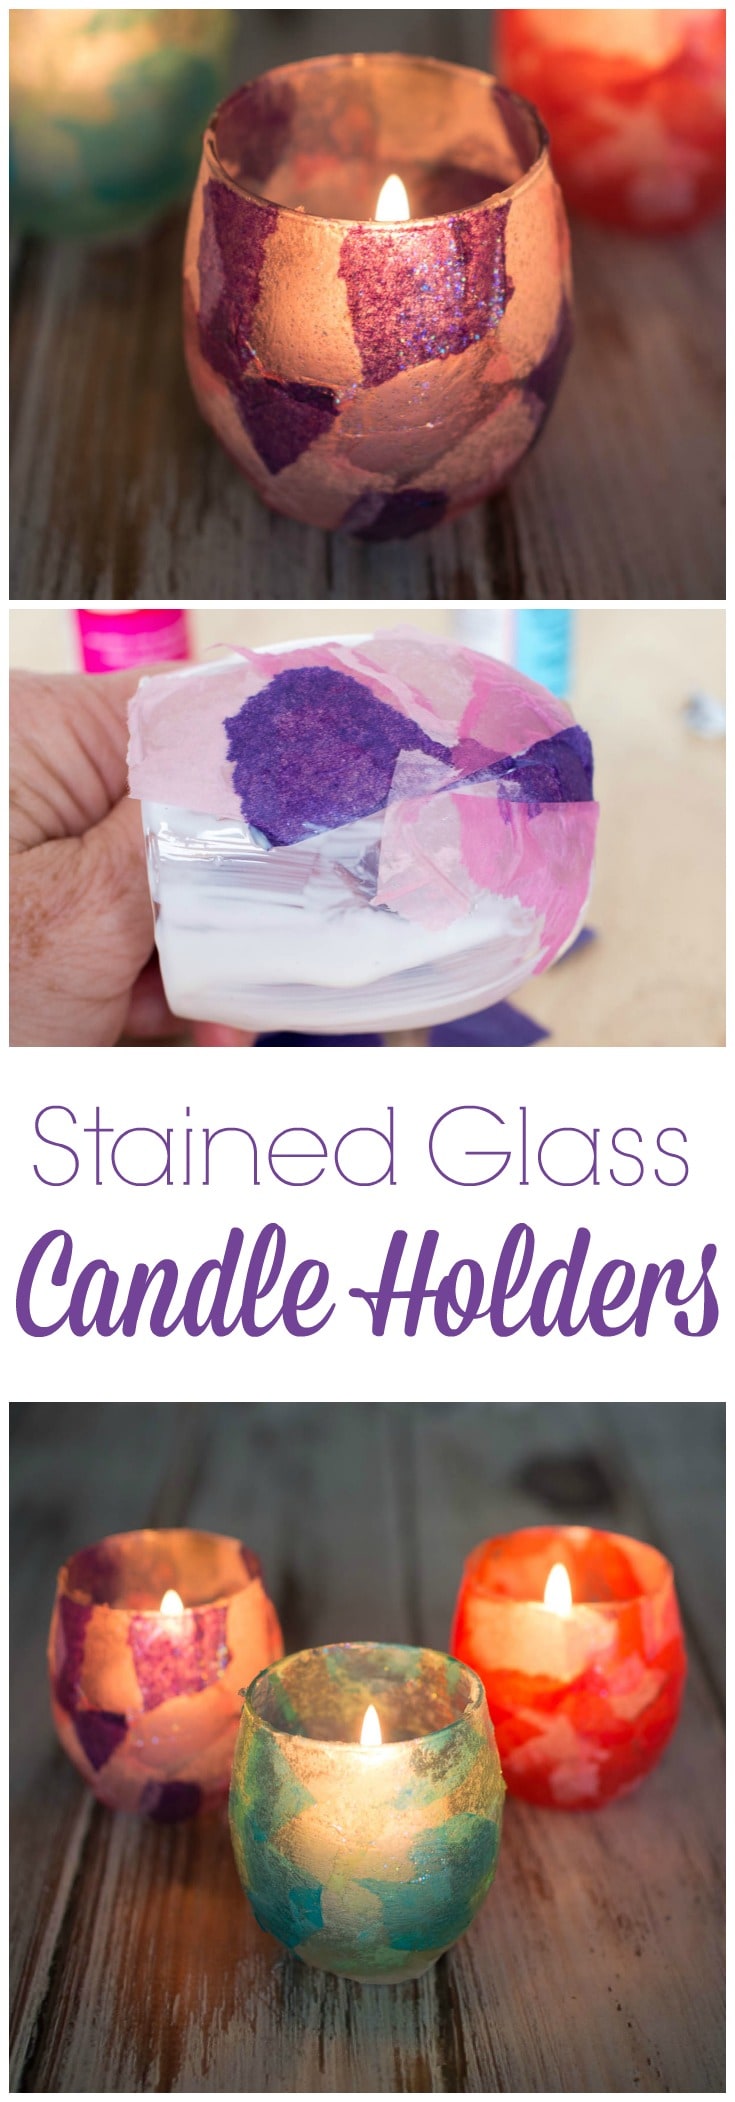 Stained Glass Votive Candle Holders - an easy to make craft using glass candle holders, tissue paper and modpodge that makes a fun holiday gift.